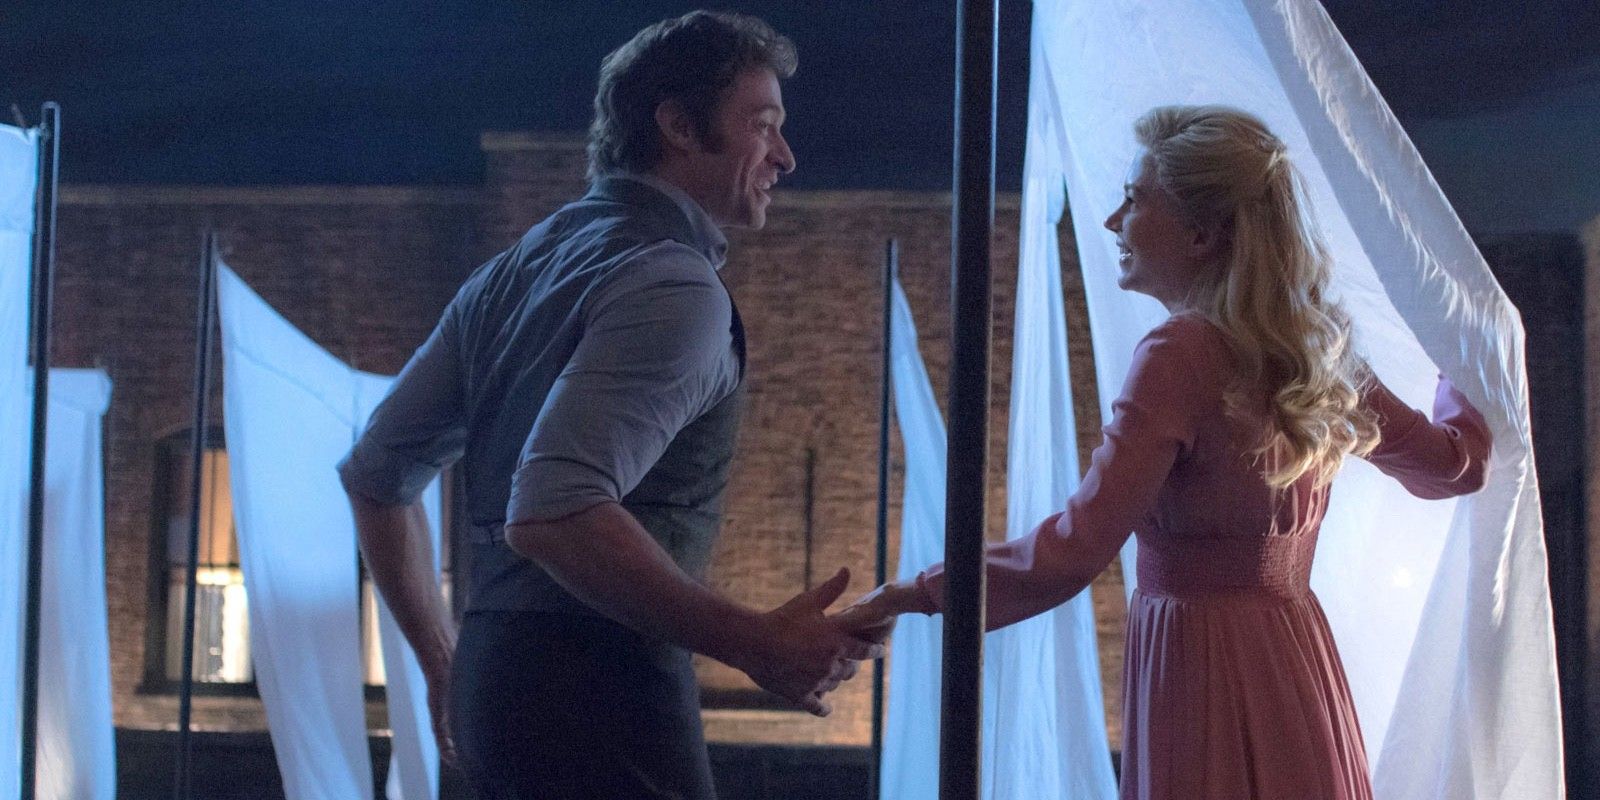 Hugh Jackman as PT Barnum and Michelle Williams as Charity in Greatest Showman